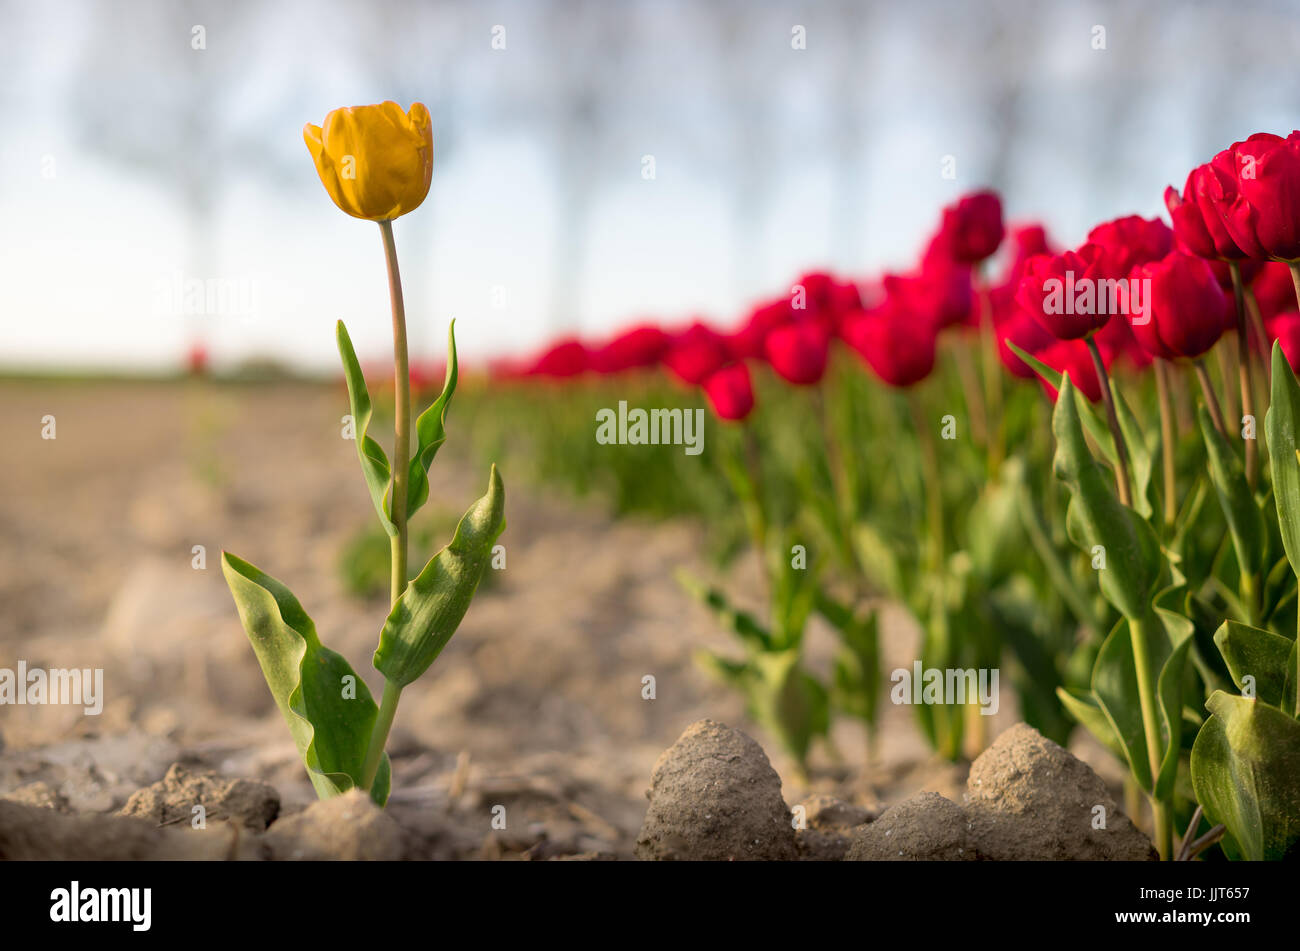 A single tulip seperated from a larger group, conceptually an outsider or the opposite, a leader. Stock Photo